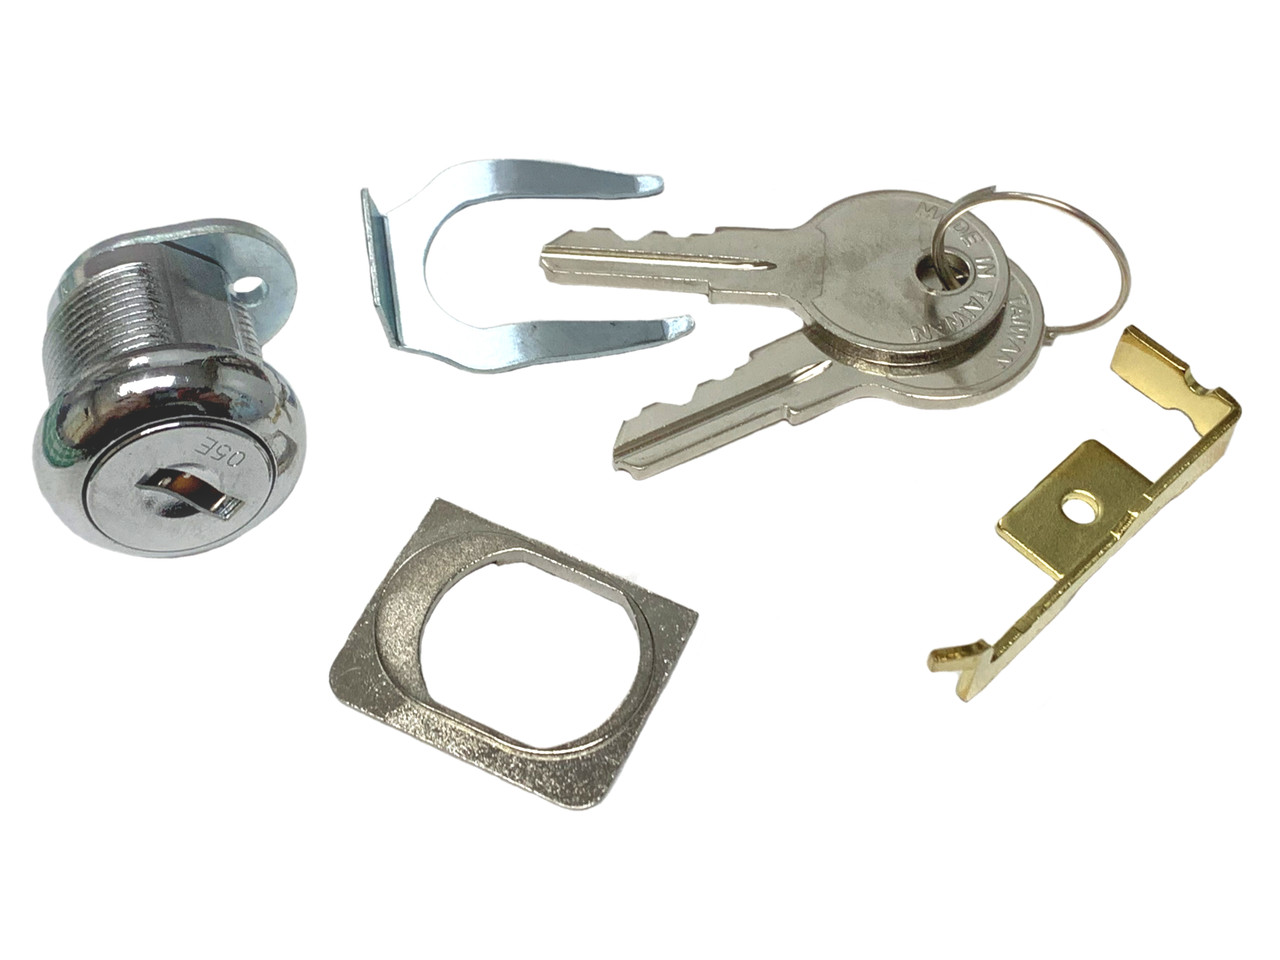 Everything To Know About Cabinet Key Locks